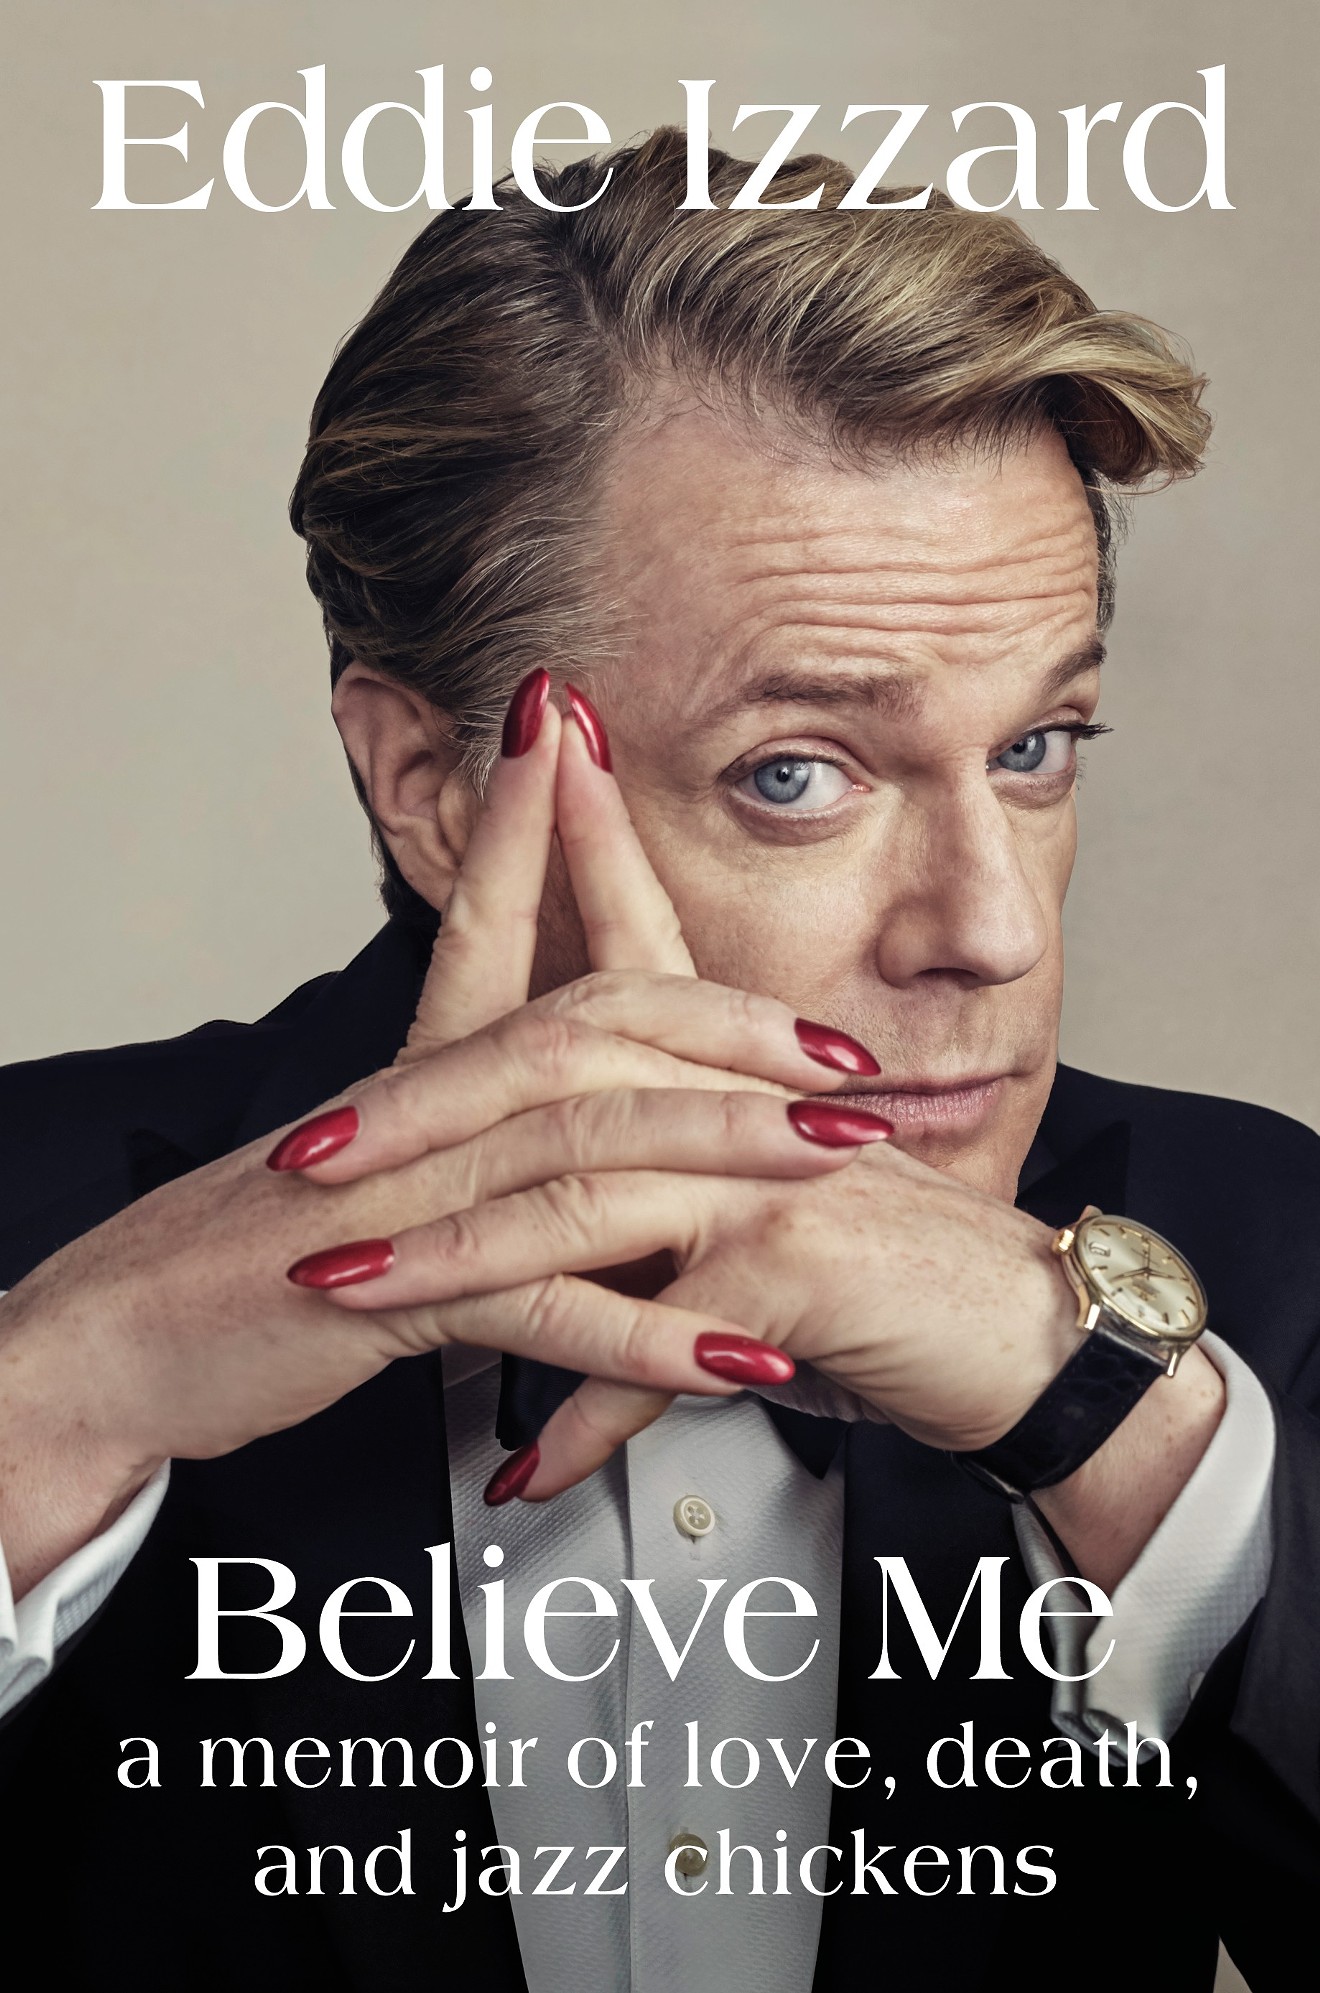 Eddie Izzard's coming to Mesa Arts Center in support of his new book.